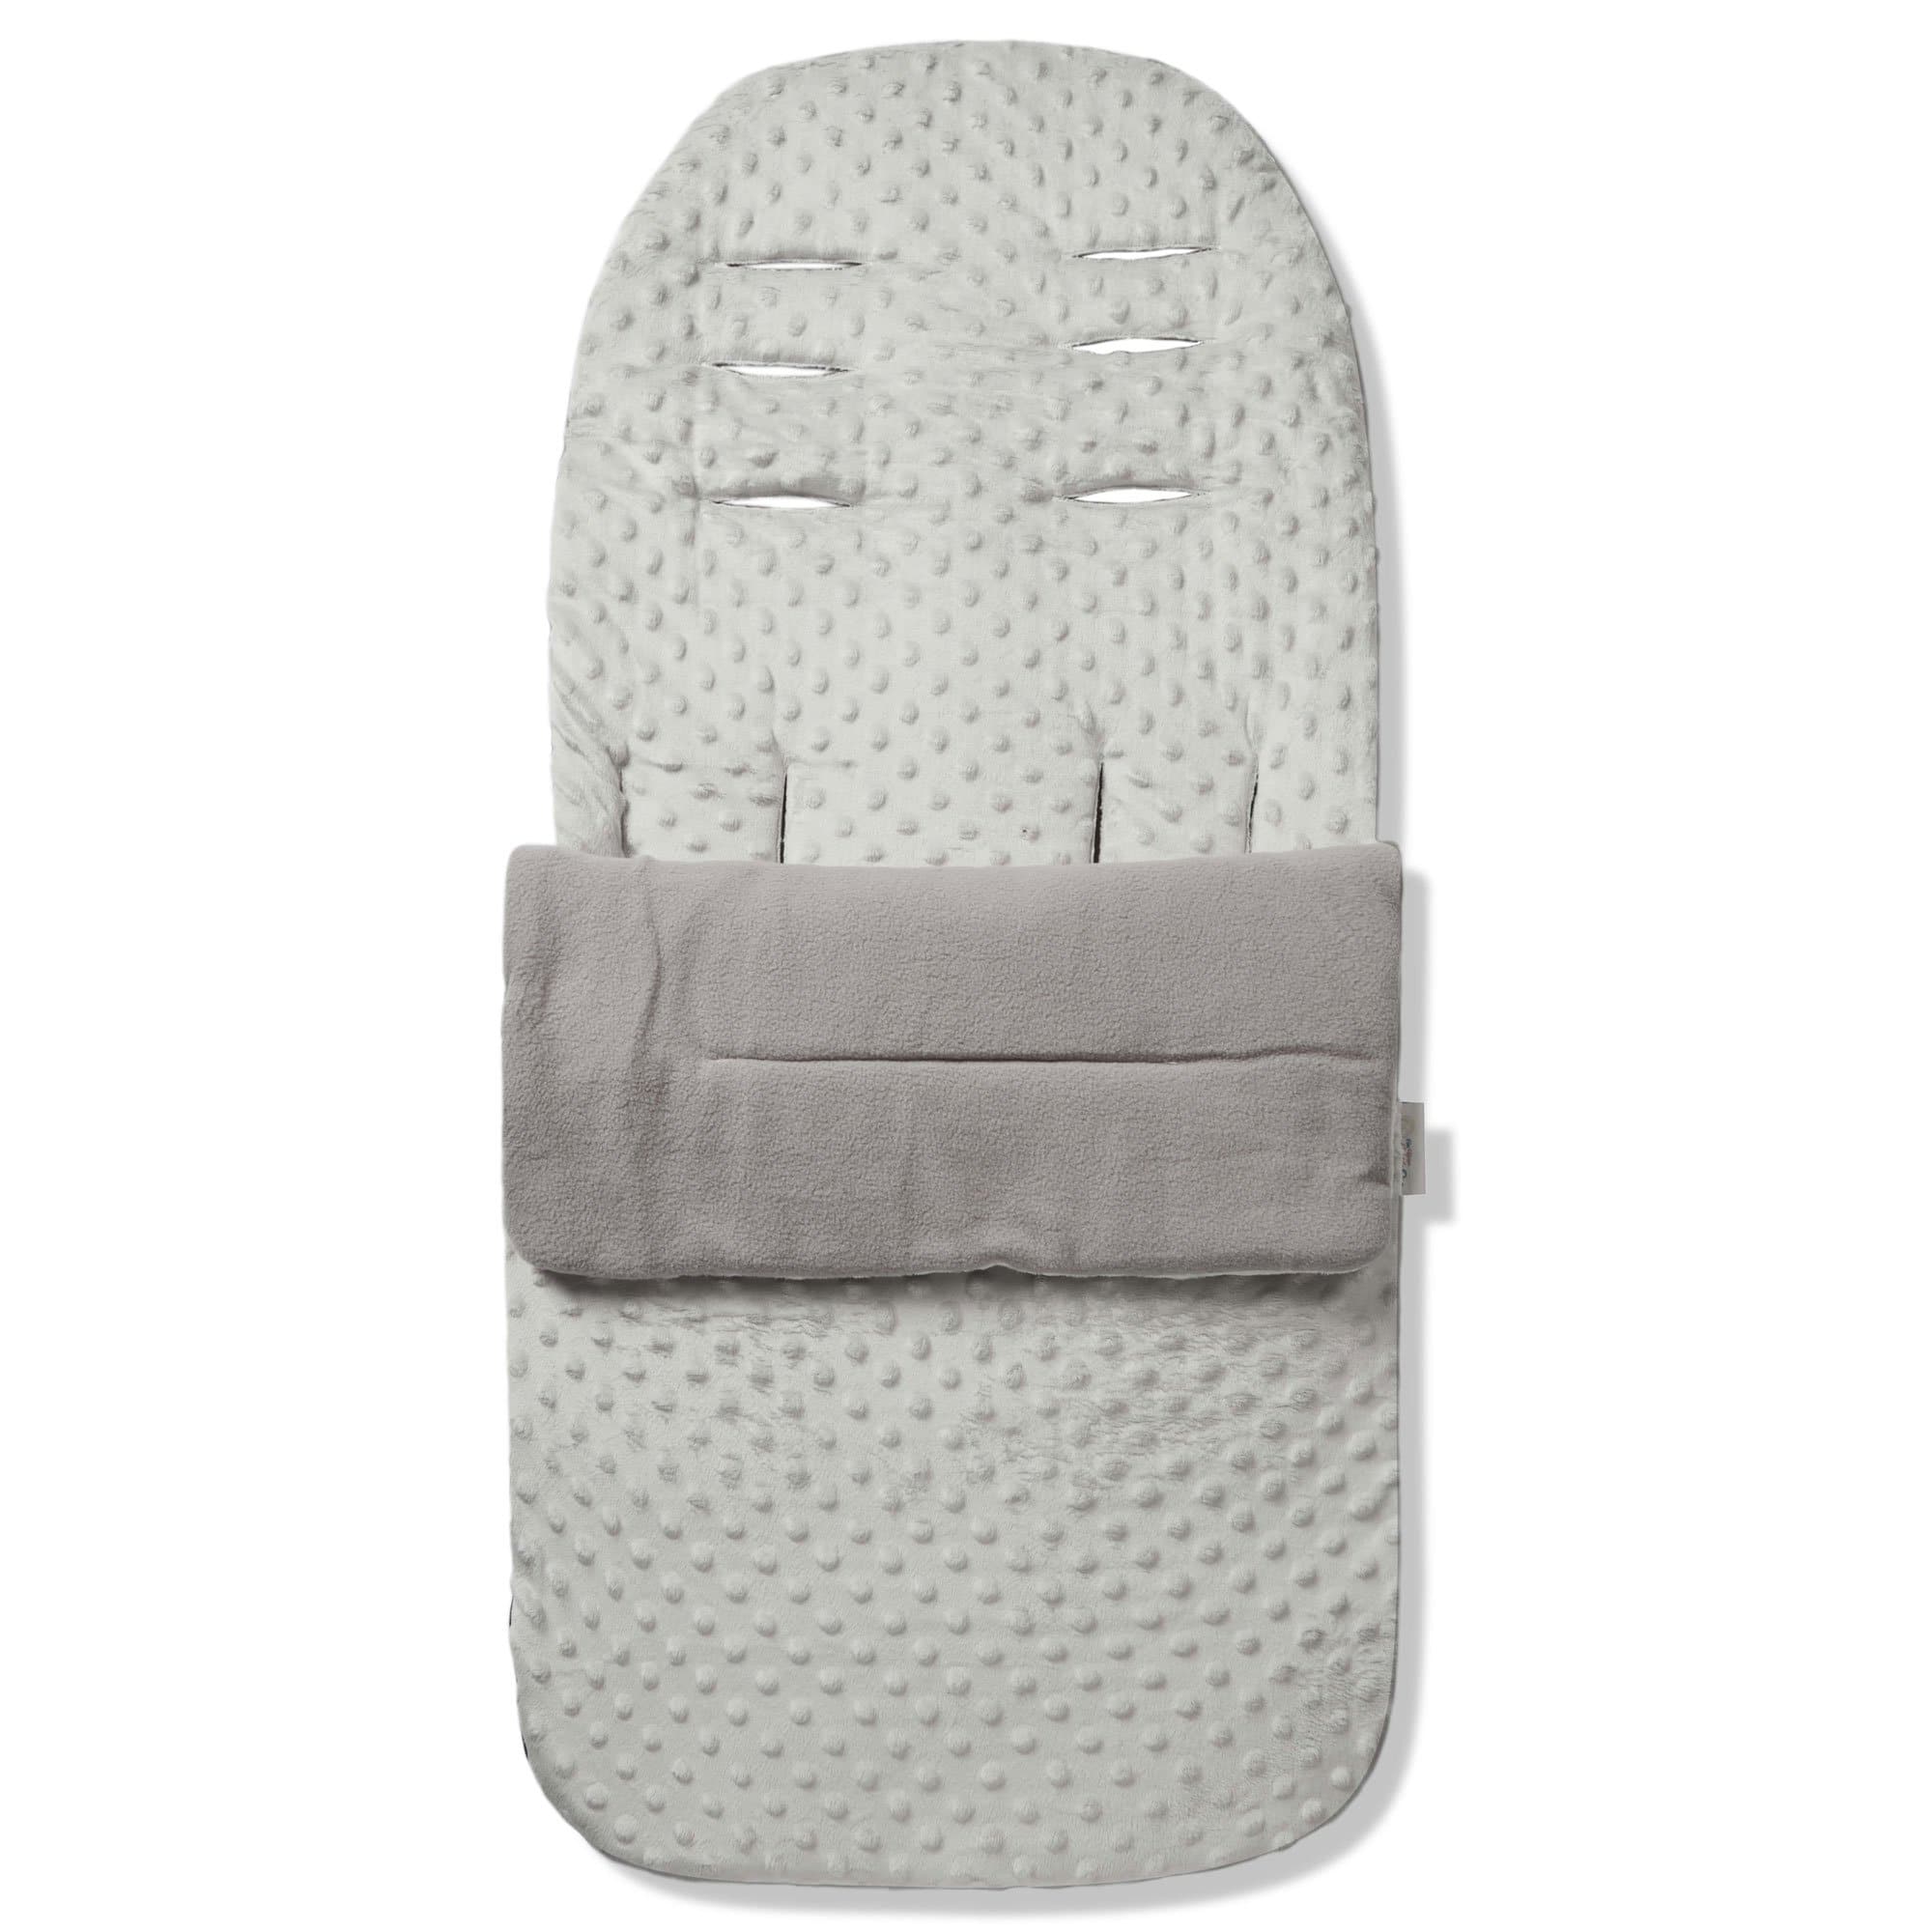 Dimple Footmuff / Cosy Toes Compatible with Stokke - For Your Little One